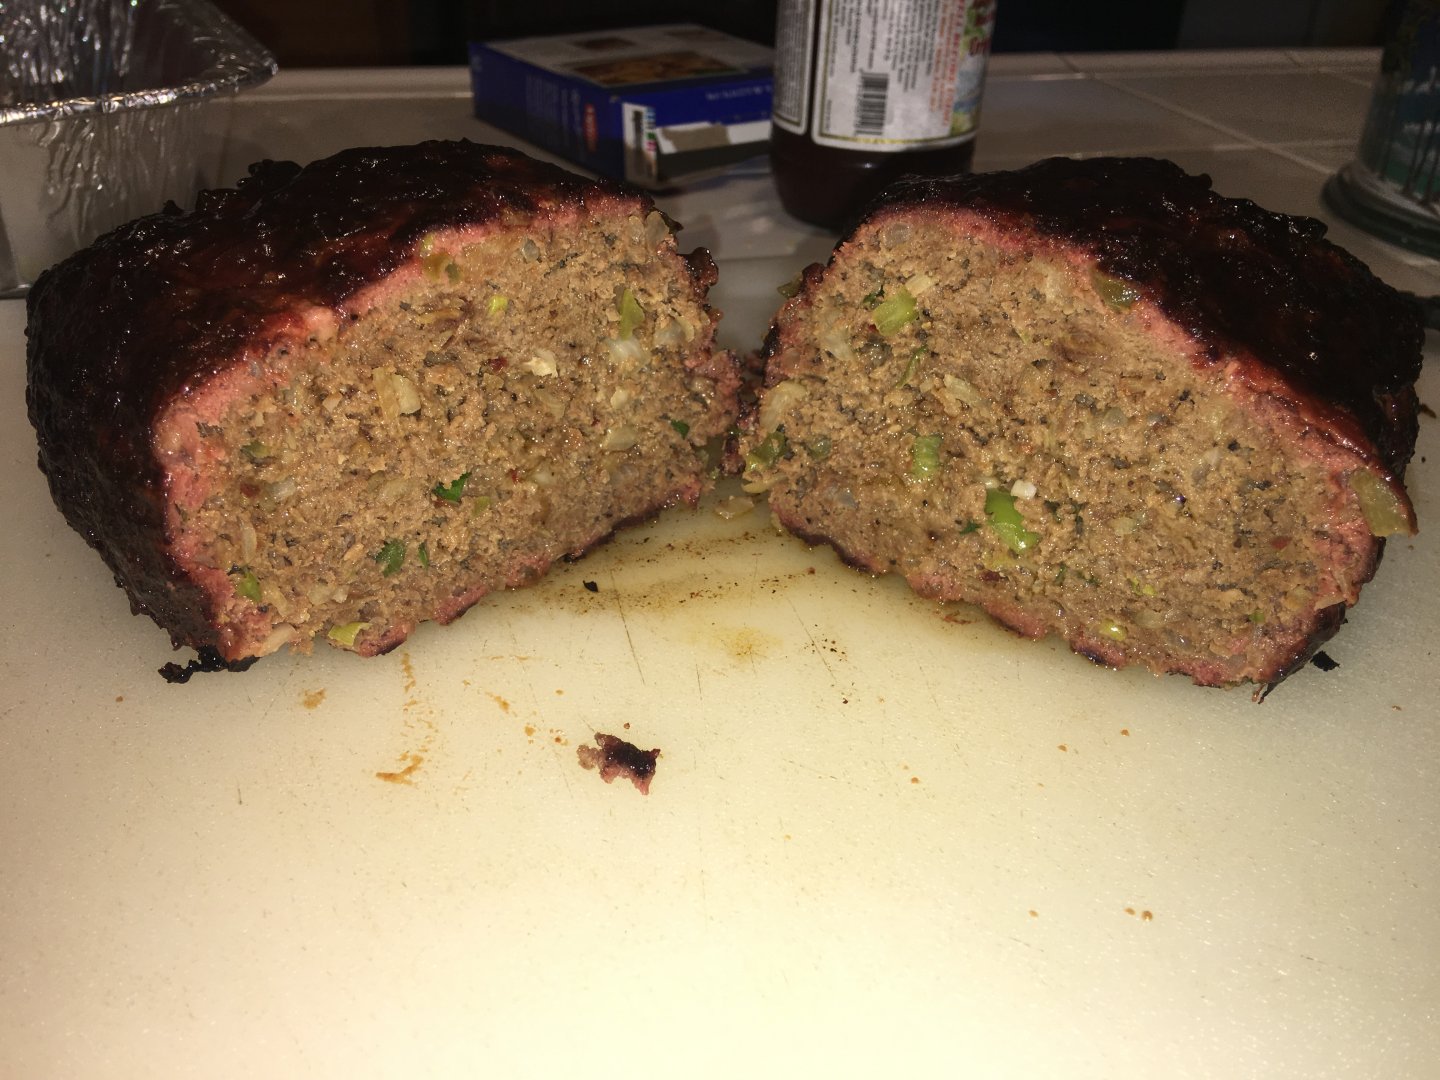 How Long To Cook A 2 Lb Meatloaf At 375 : How Long To Cook A 2 Lb Meatloaf At 375 / Gluten Free ...